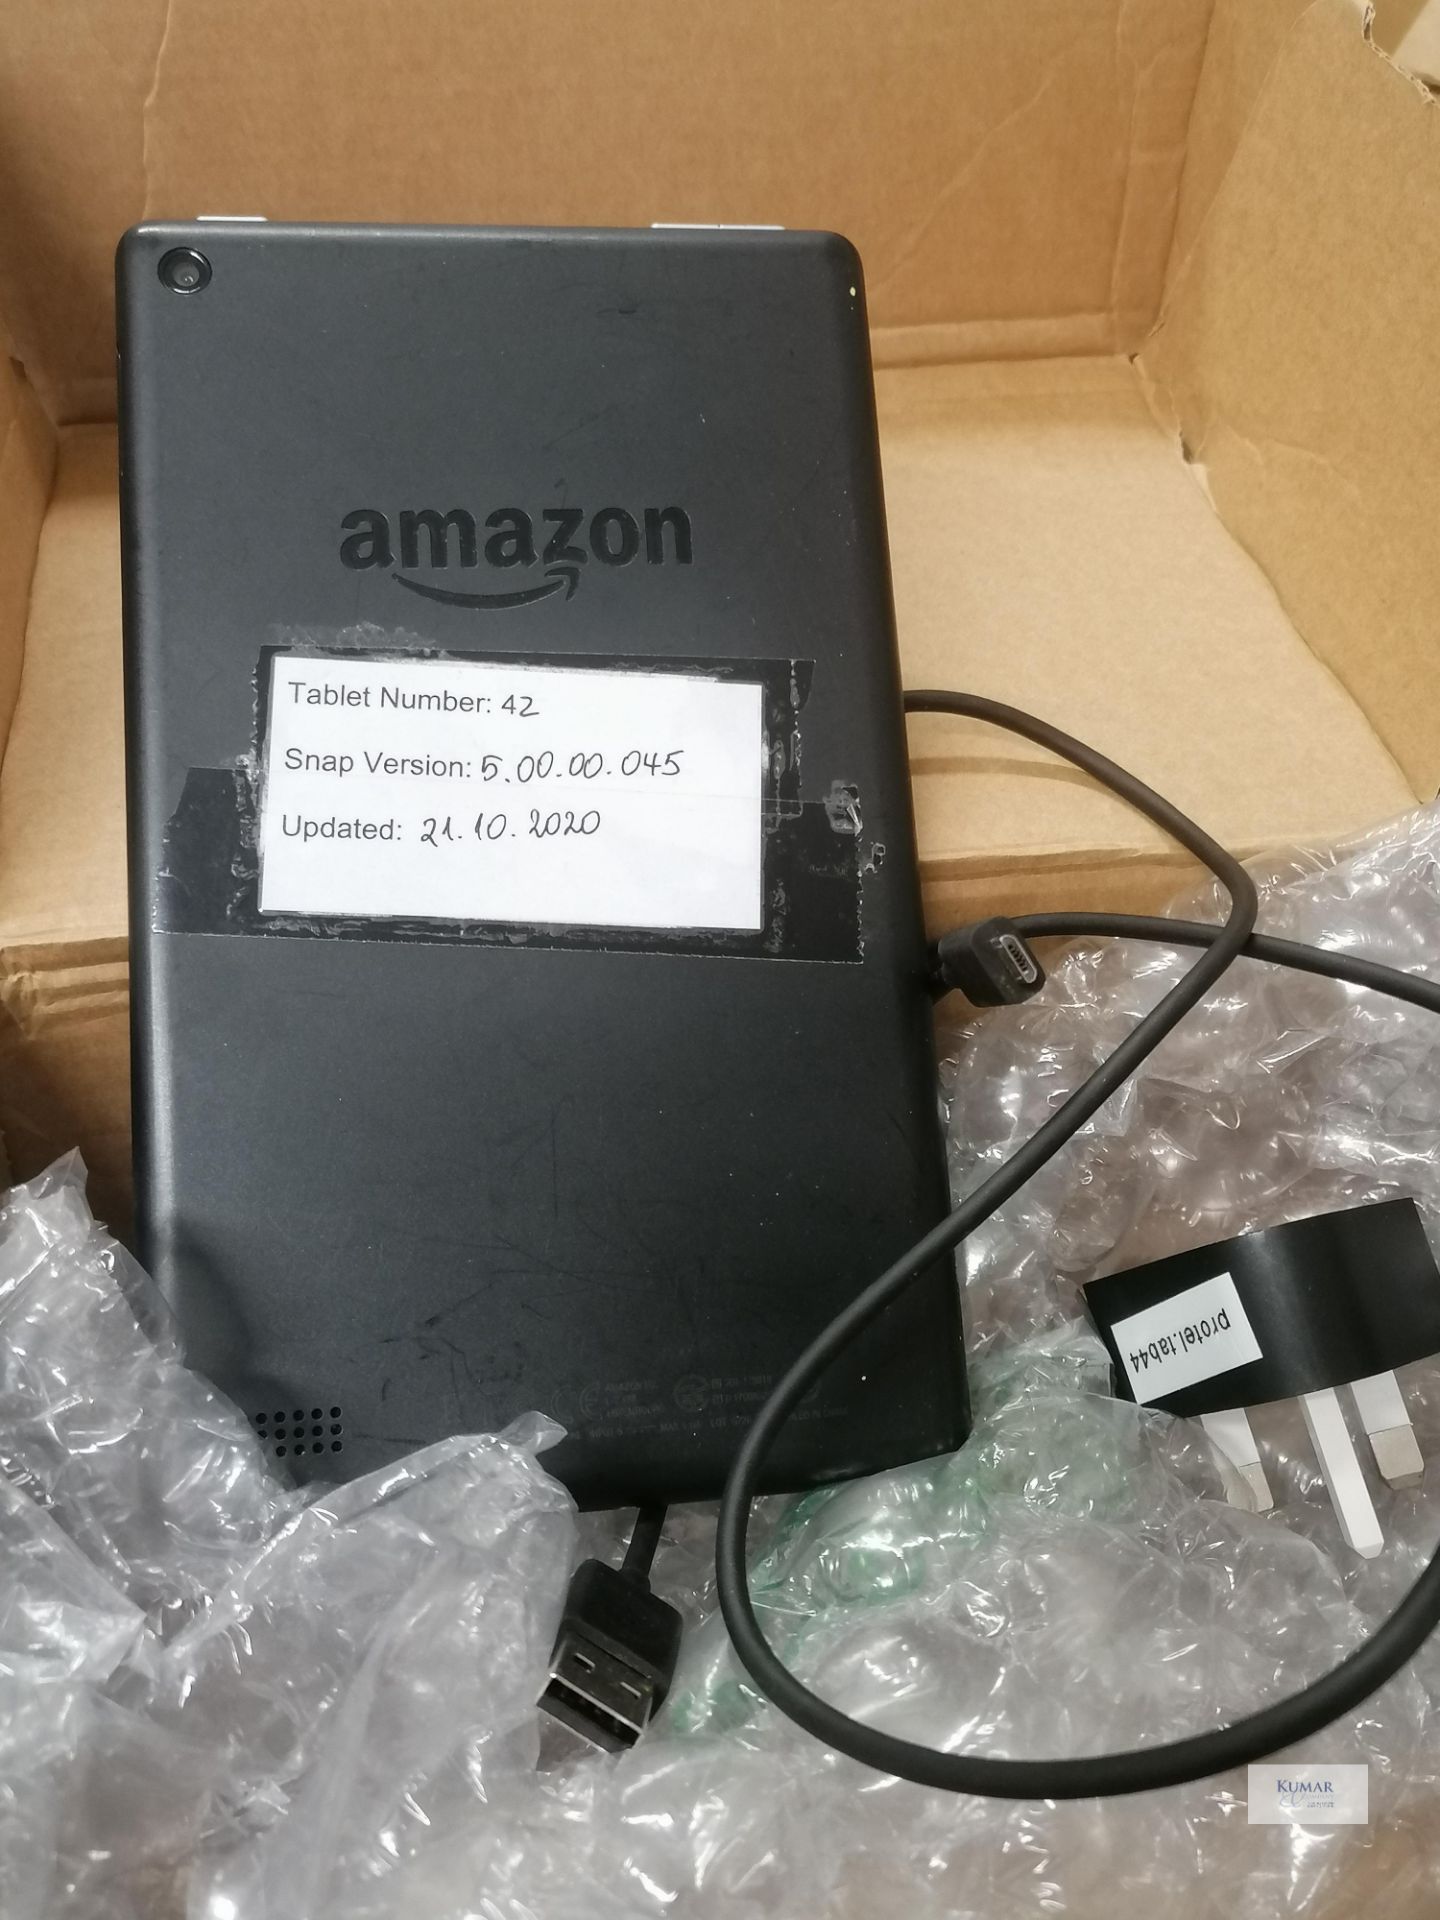 Amazon Fire 7.7" Touch screen Model No SRO43KL Updated 21 10 2020 Cable and charger - Image 2 of 3